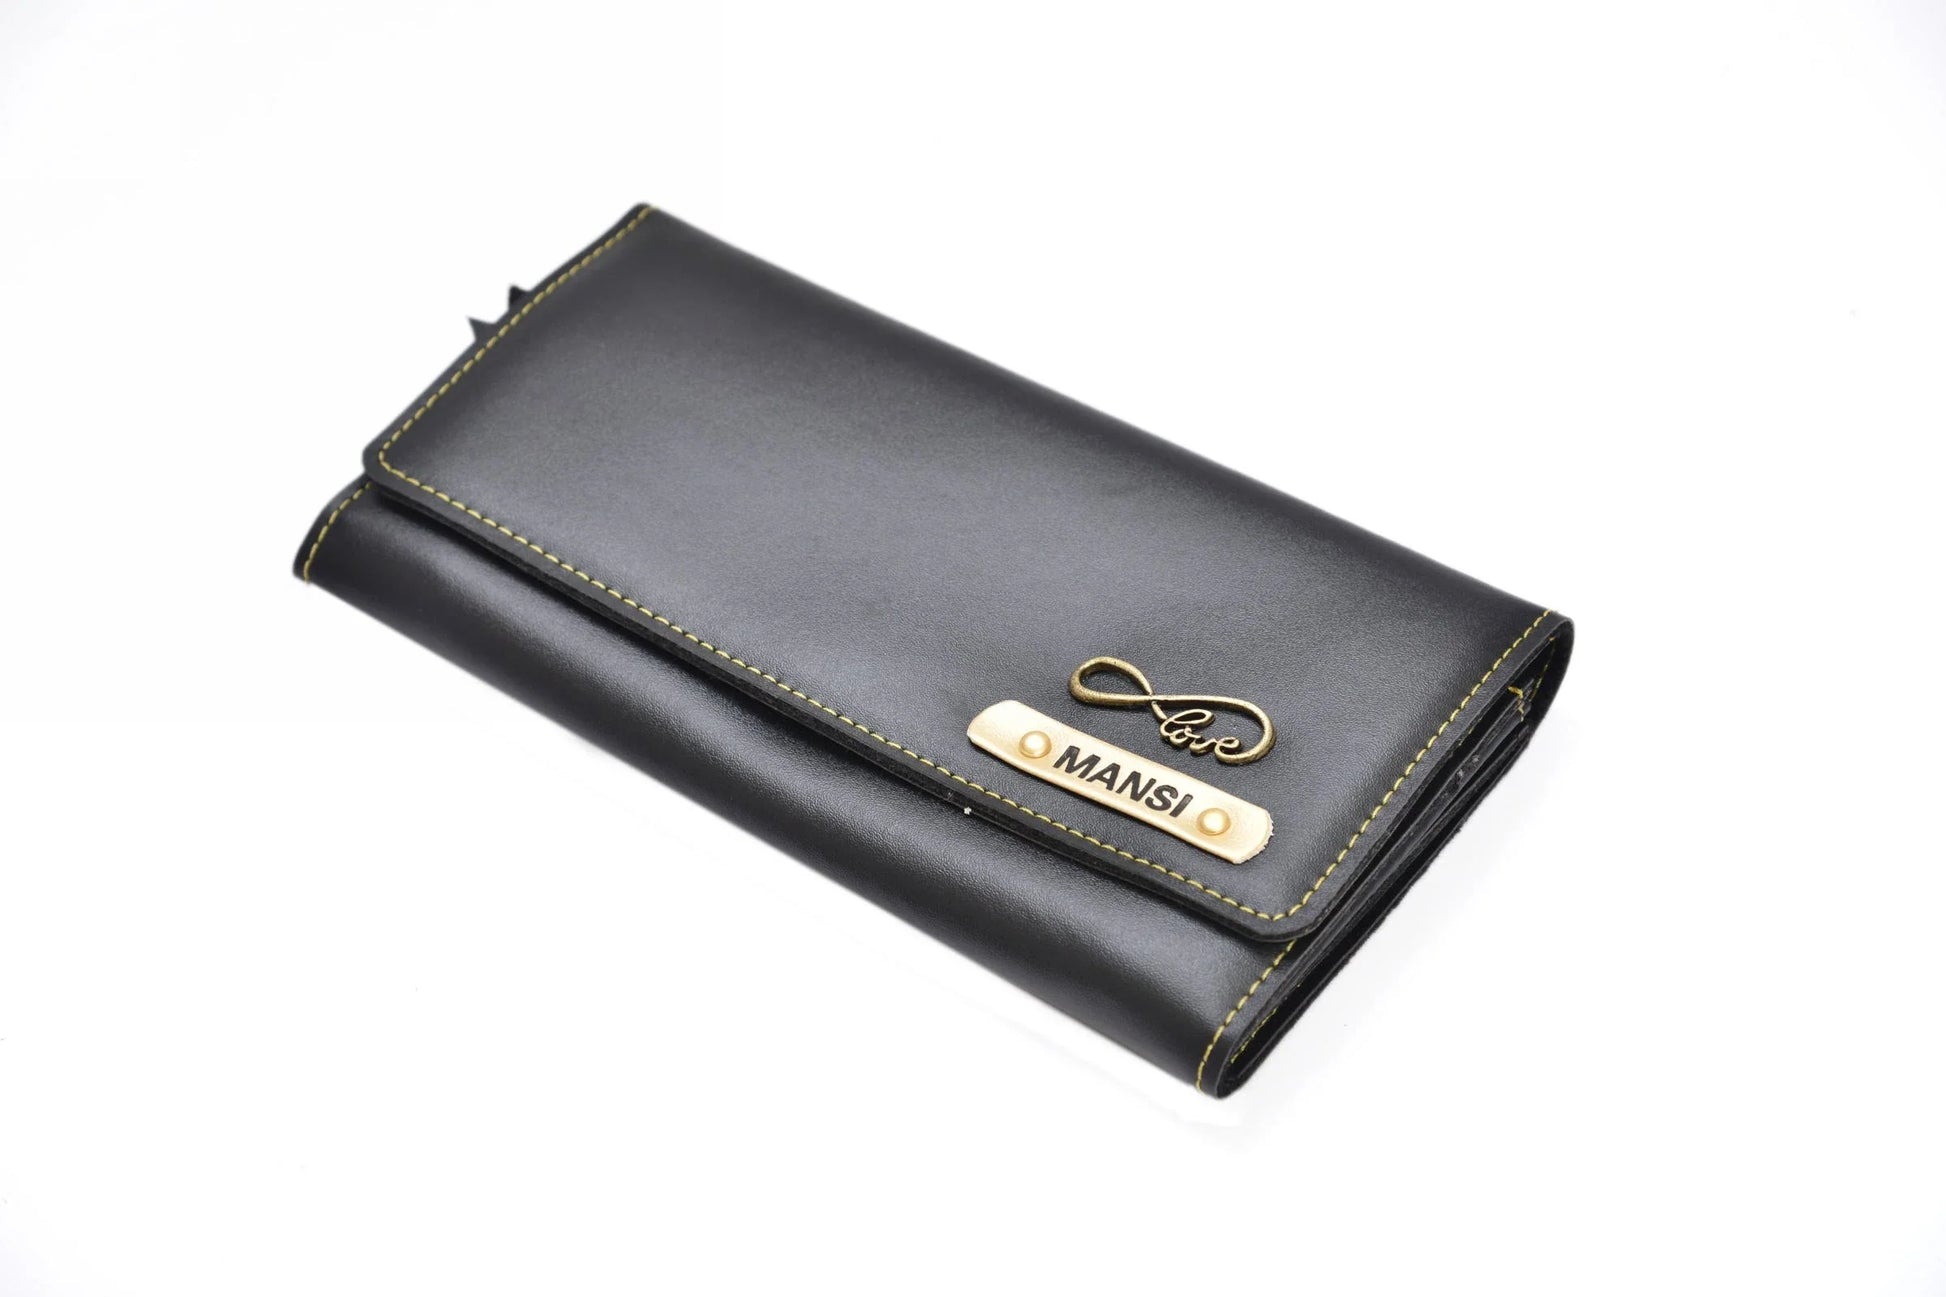 Made from high-quality materials and featuring practical features like multiple card slots and a coin compartment, our wallets are perfect for everyday use. 